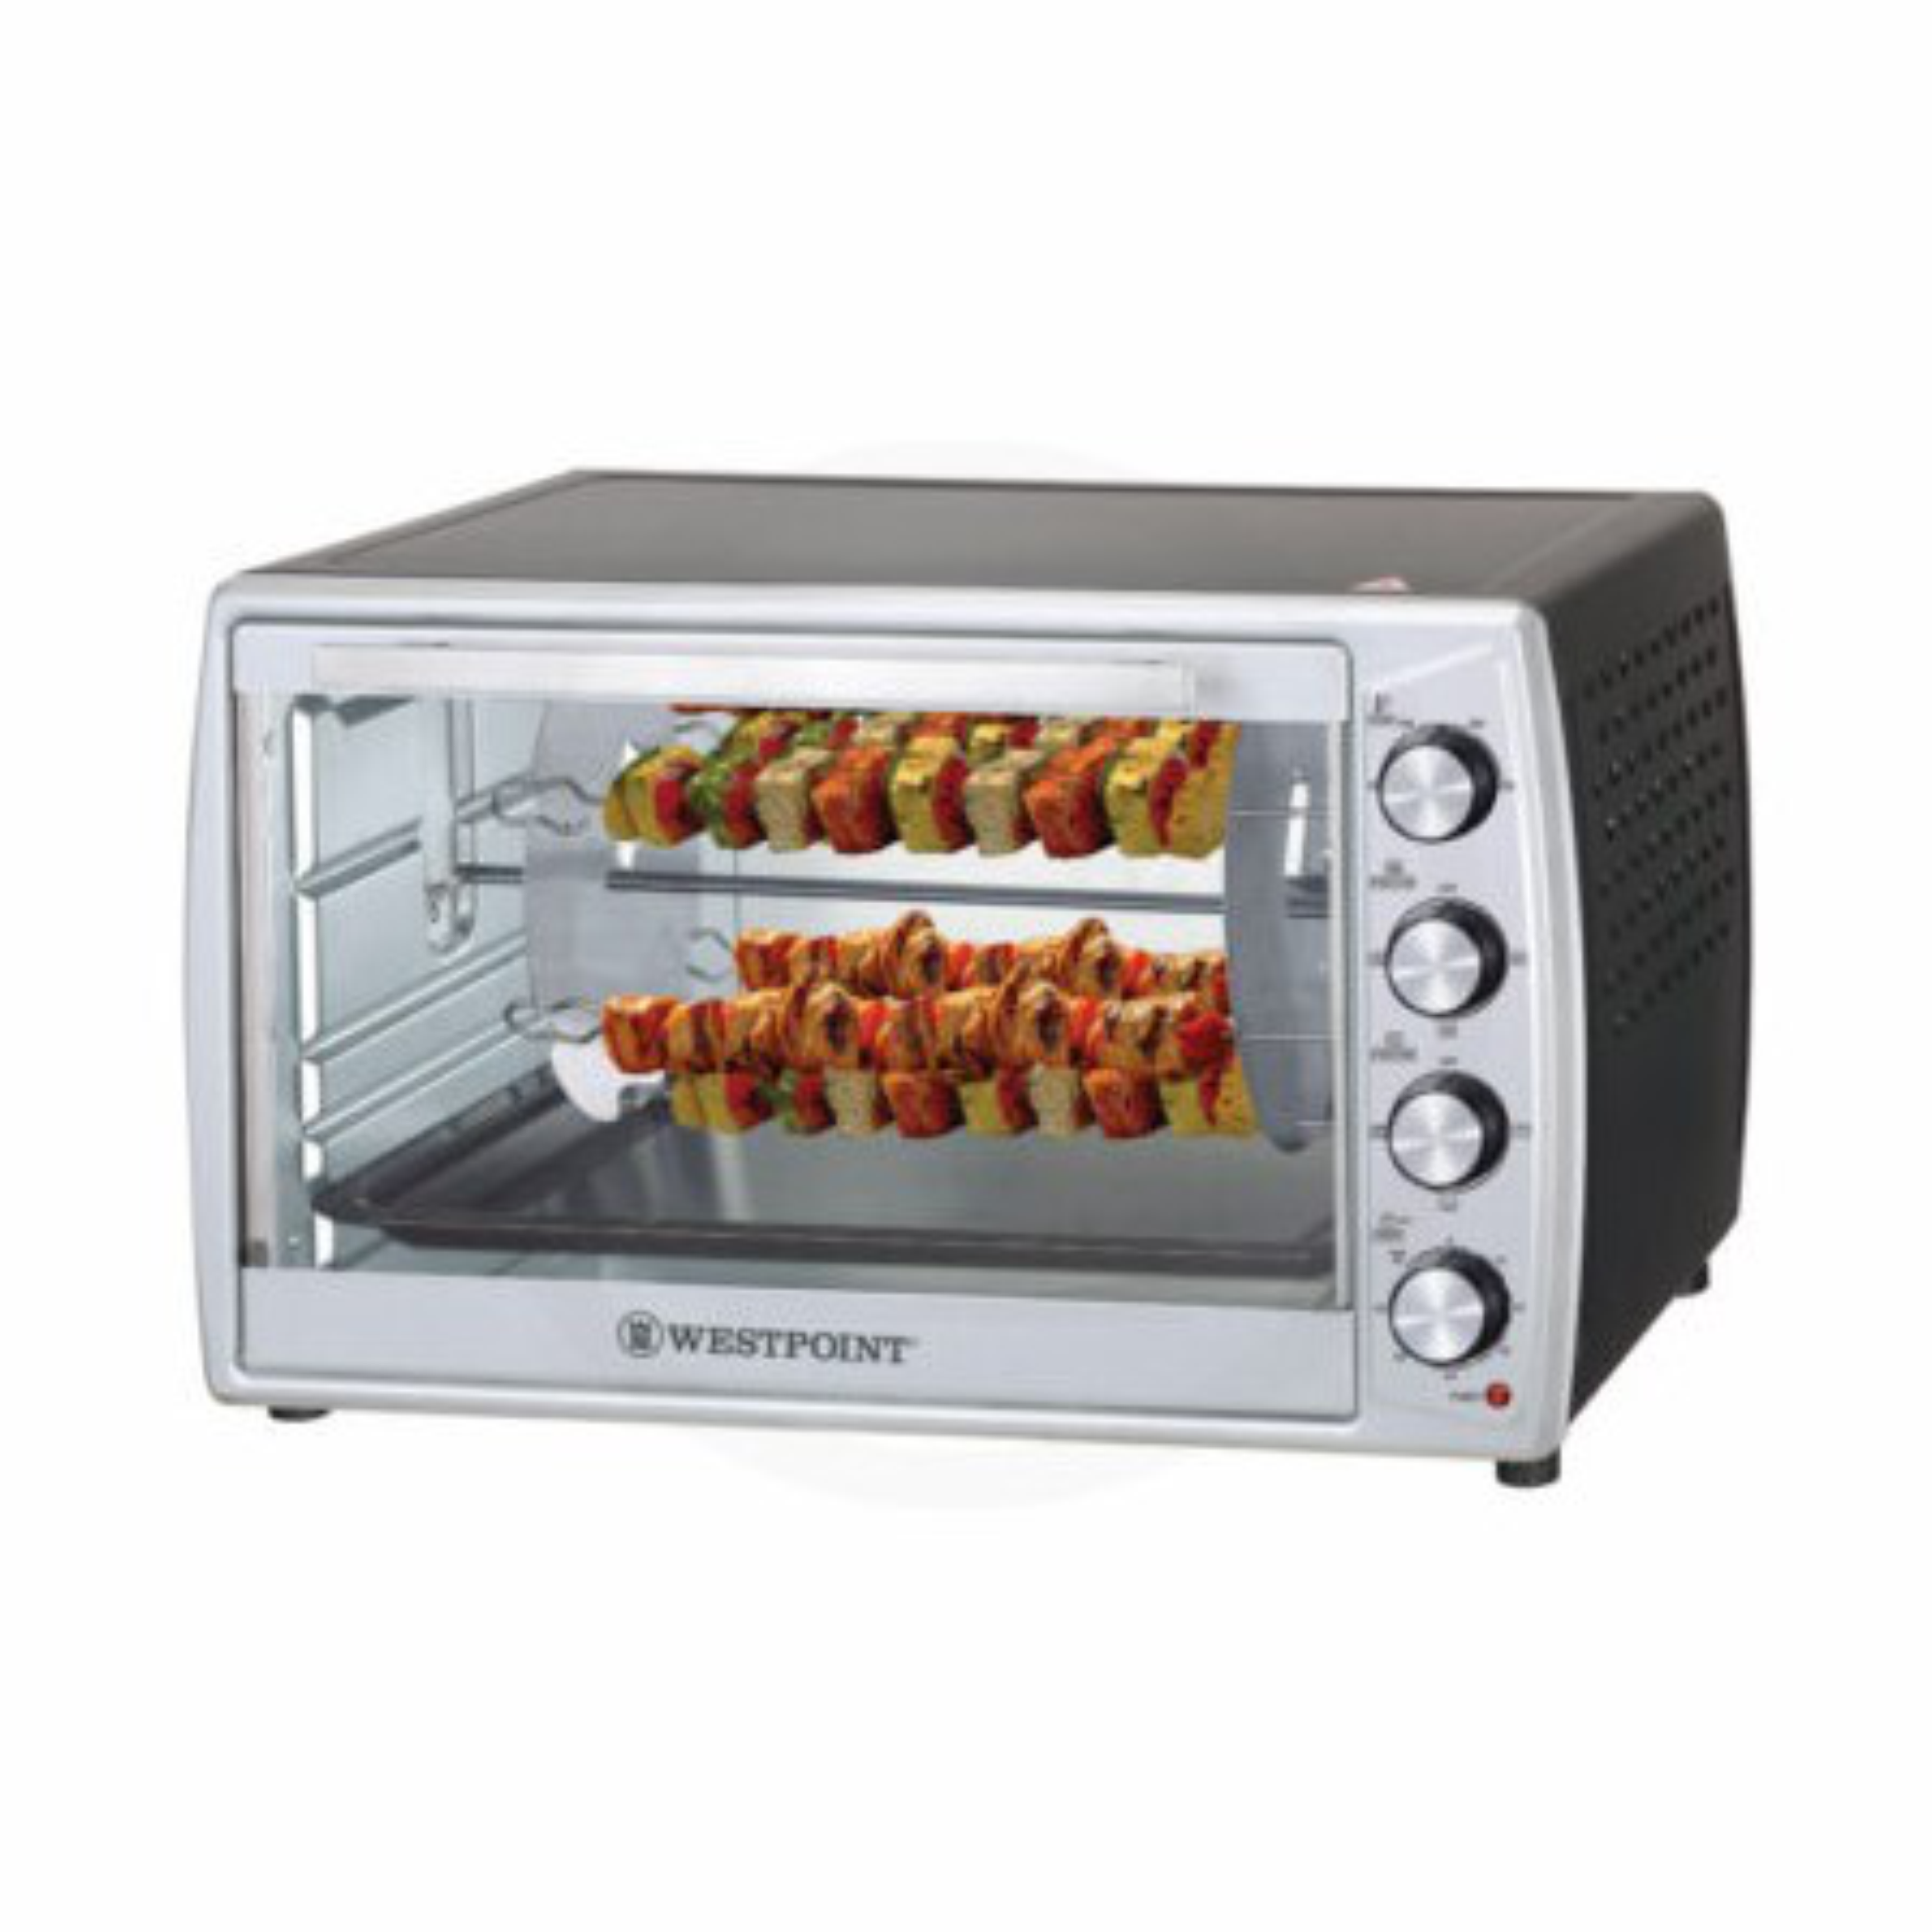 6300 - Oven + Toaster + Grill (63L)